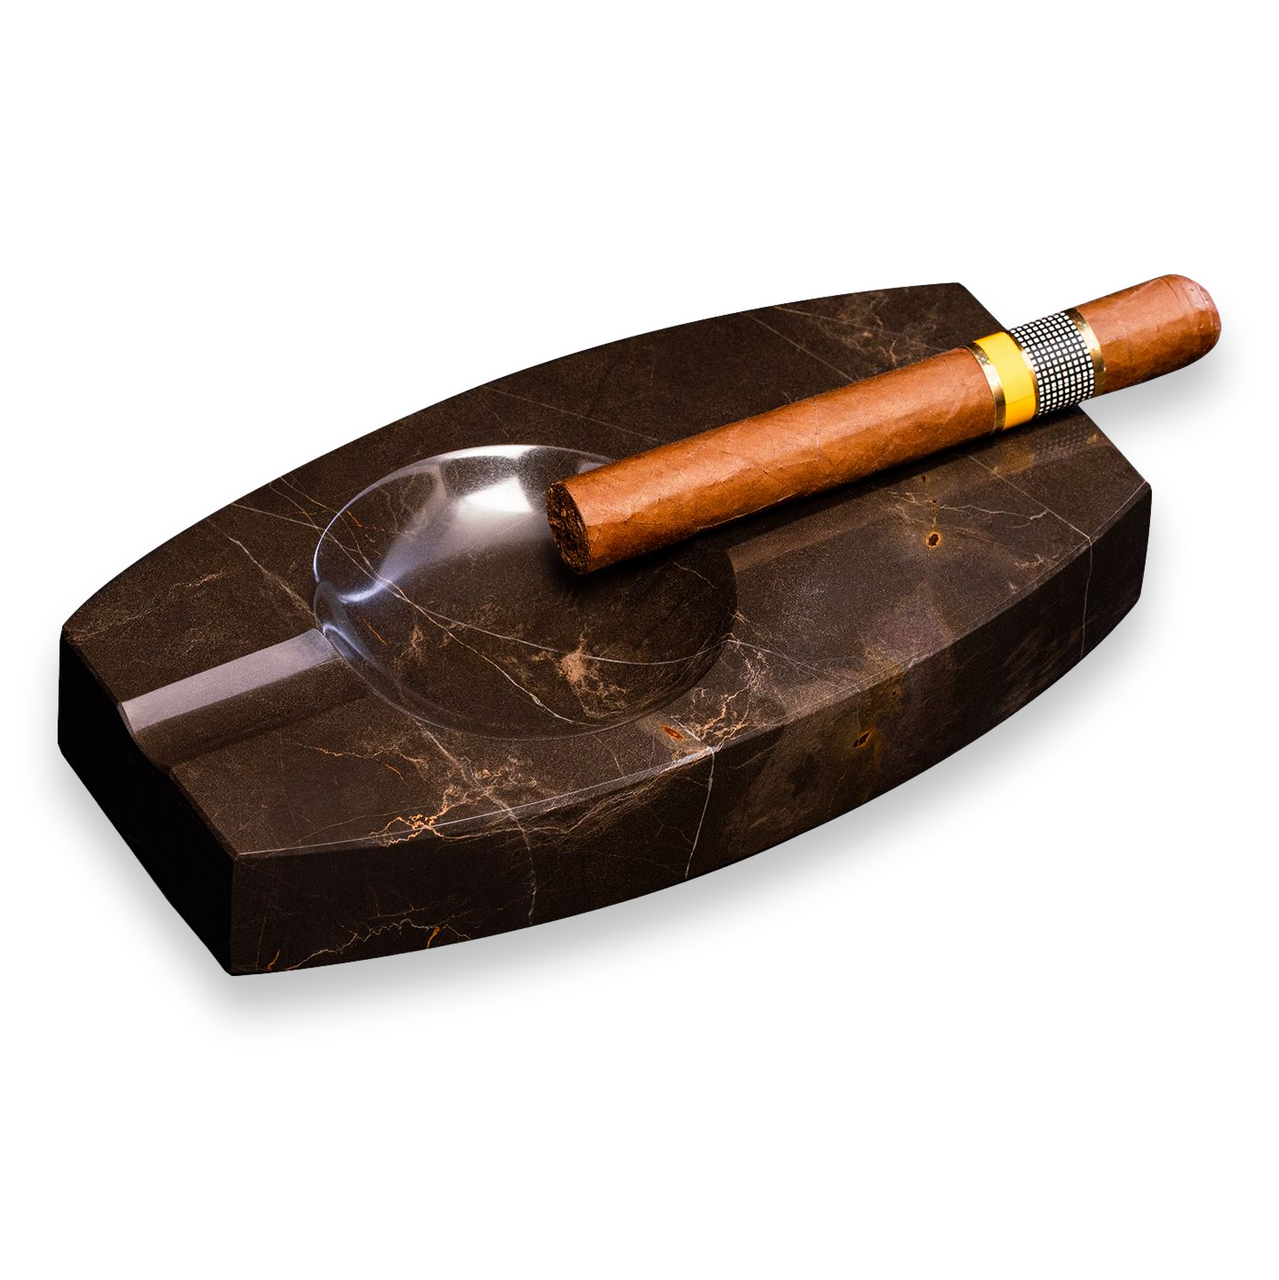 https://cdn11.bigcommerce.com/s-c63ufk/images/stencil/1280x1280/products/1679/8350/Bey-Berk-Marble-2-Cigar-Ashtray-Amber-Emperador-C322-Exterior-Front-with-Cigar-1_clipped_rev_1__27304.1624209894.png?c=2?imbypass=on